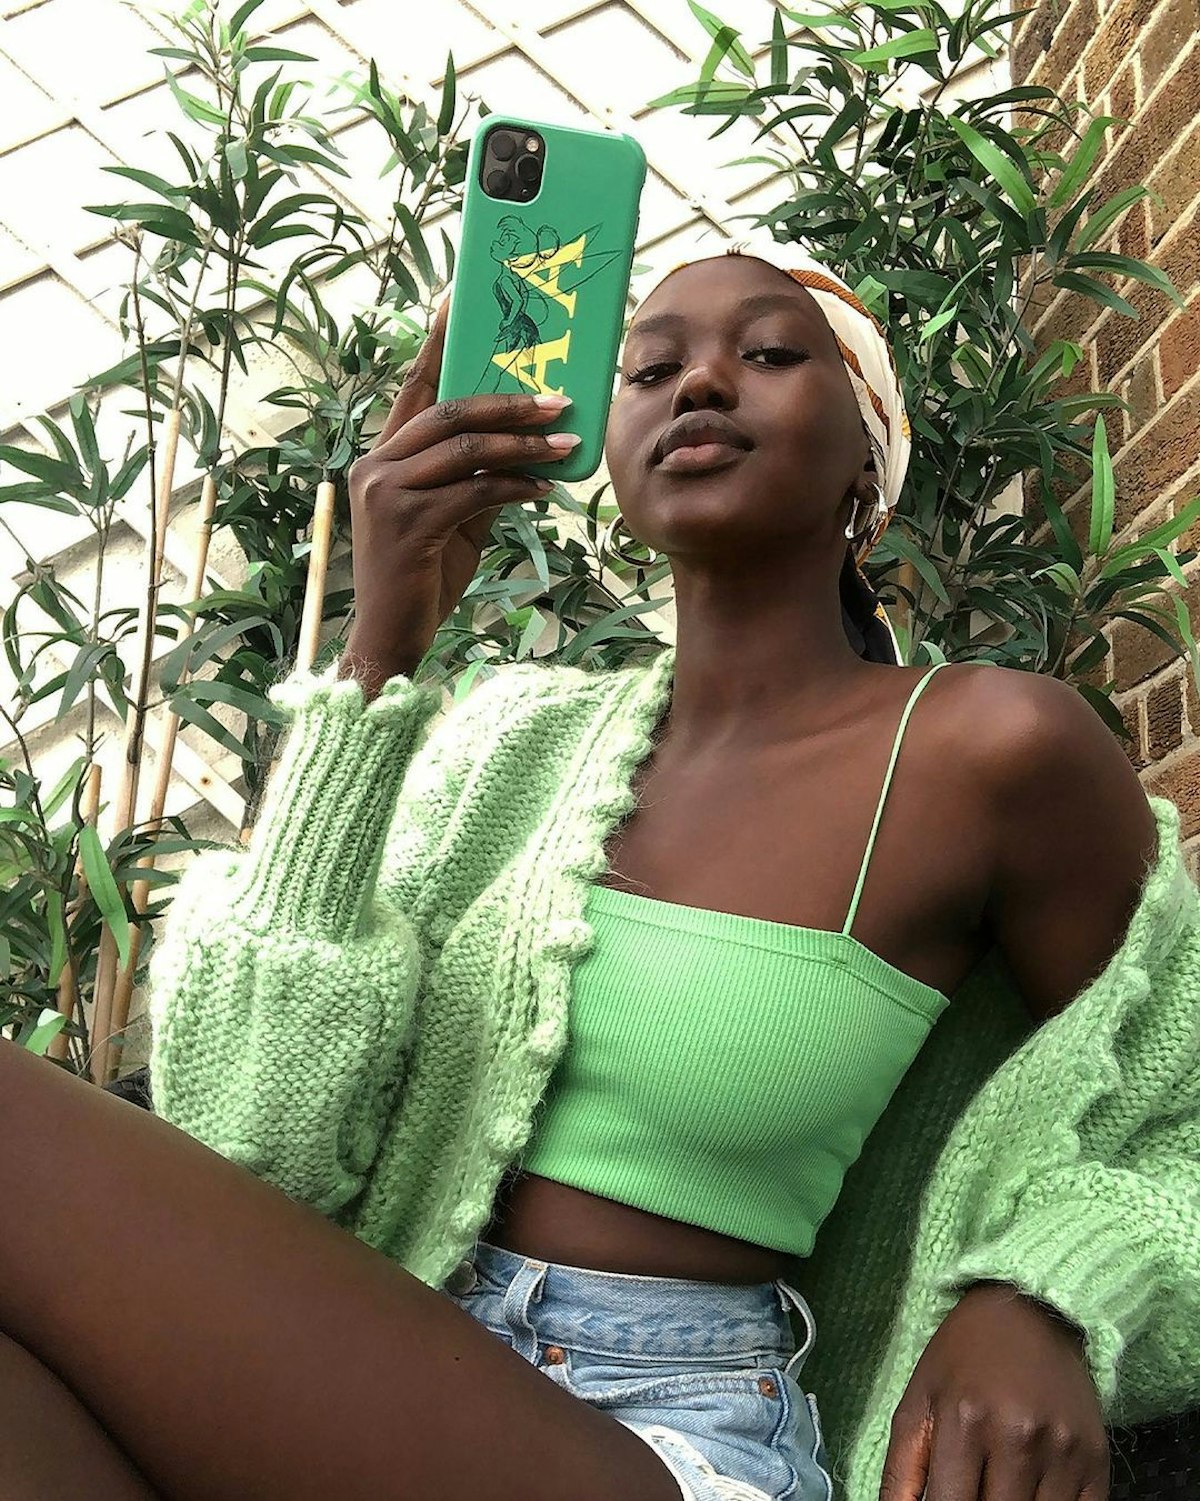 16 Black Fashion Influencers to Follow Now - Black Influencers Instagram  Style